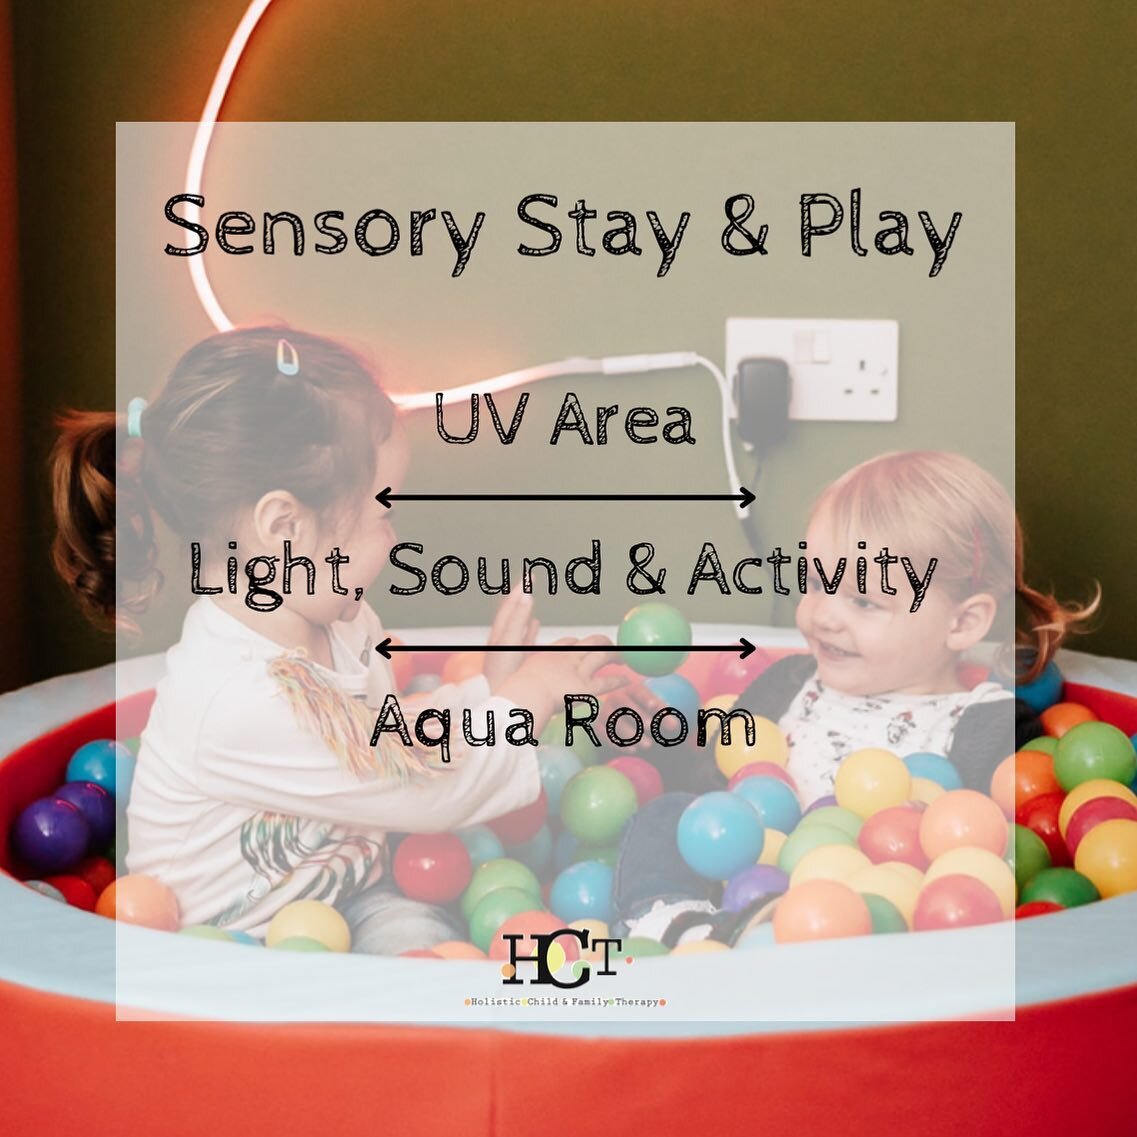 We are so excited to welcome you all to our Stay &amp; Plays this week! Come and explore all the Sensory Sanctuary has to offer. We are adding 2 extra sessions for this week. Visit our website (LINK IN BIO) to book 💗

#sensorysanctuary #sensory #sen